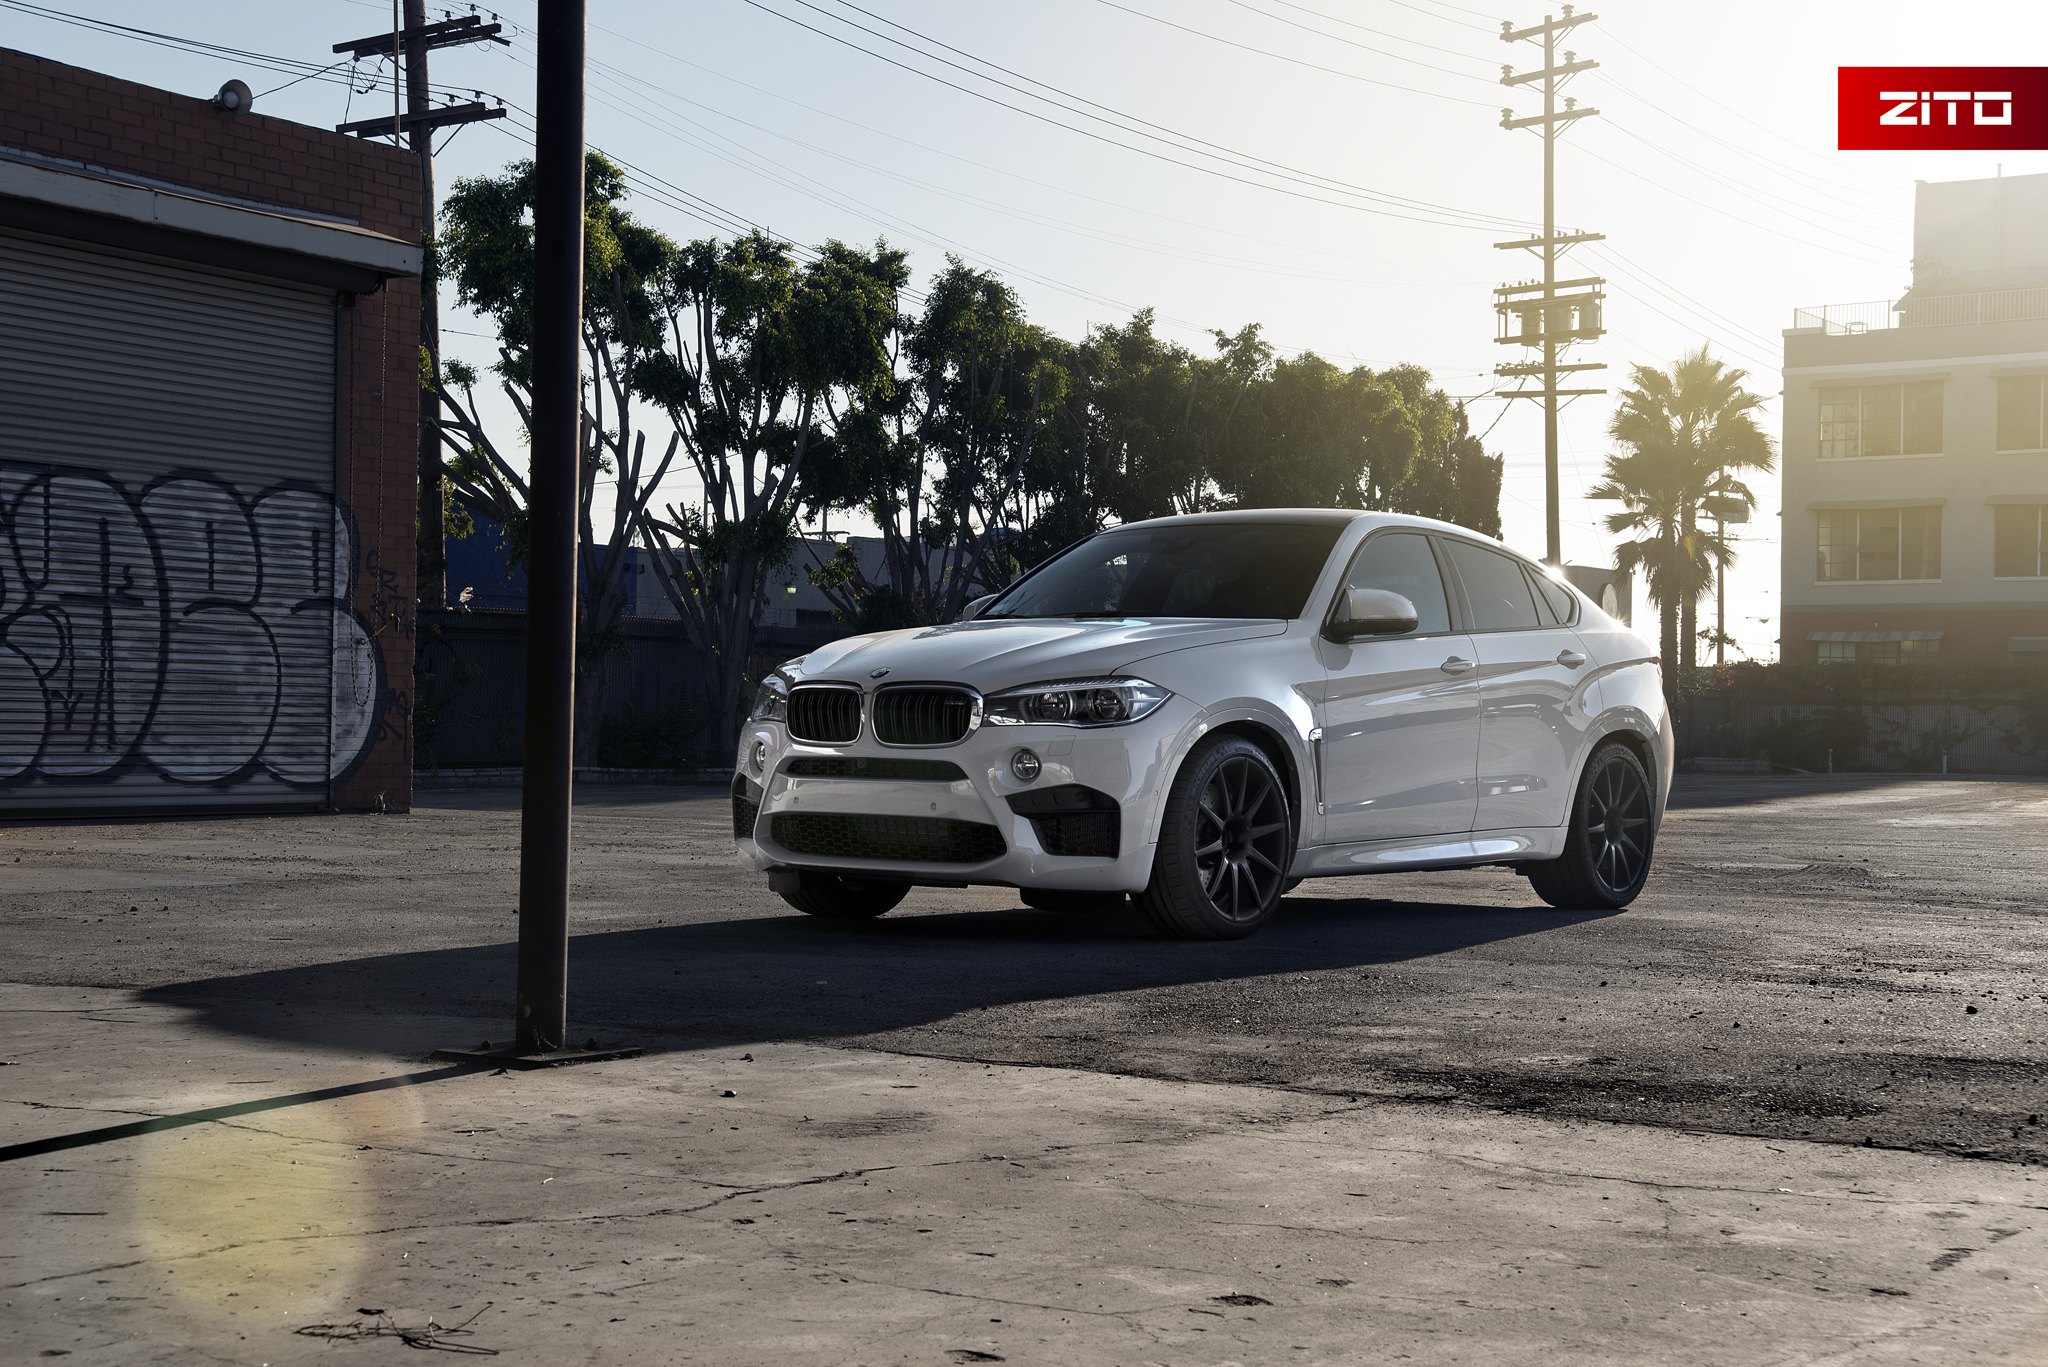 Custom Front Bumper on White BMW X6 - Photo by Zito Wheels